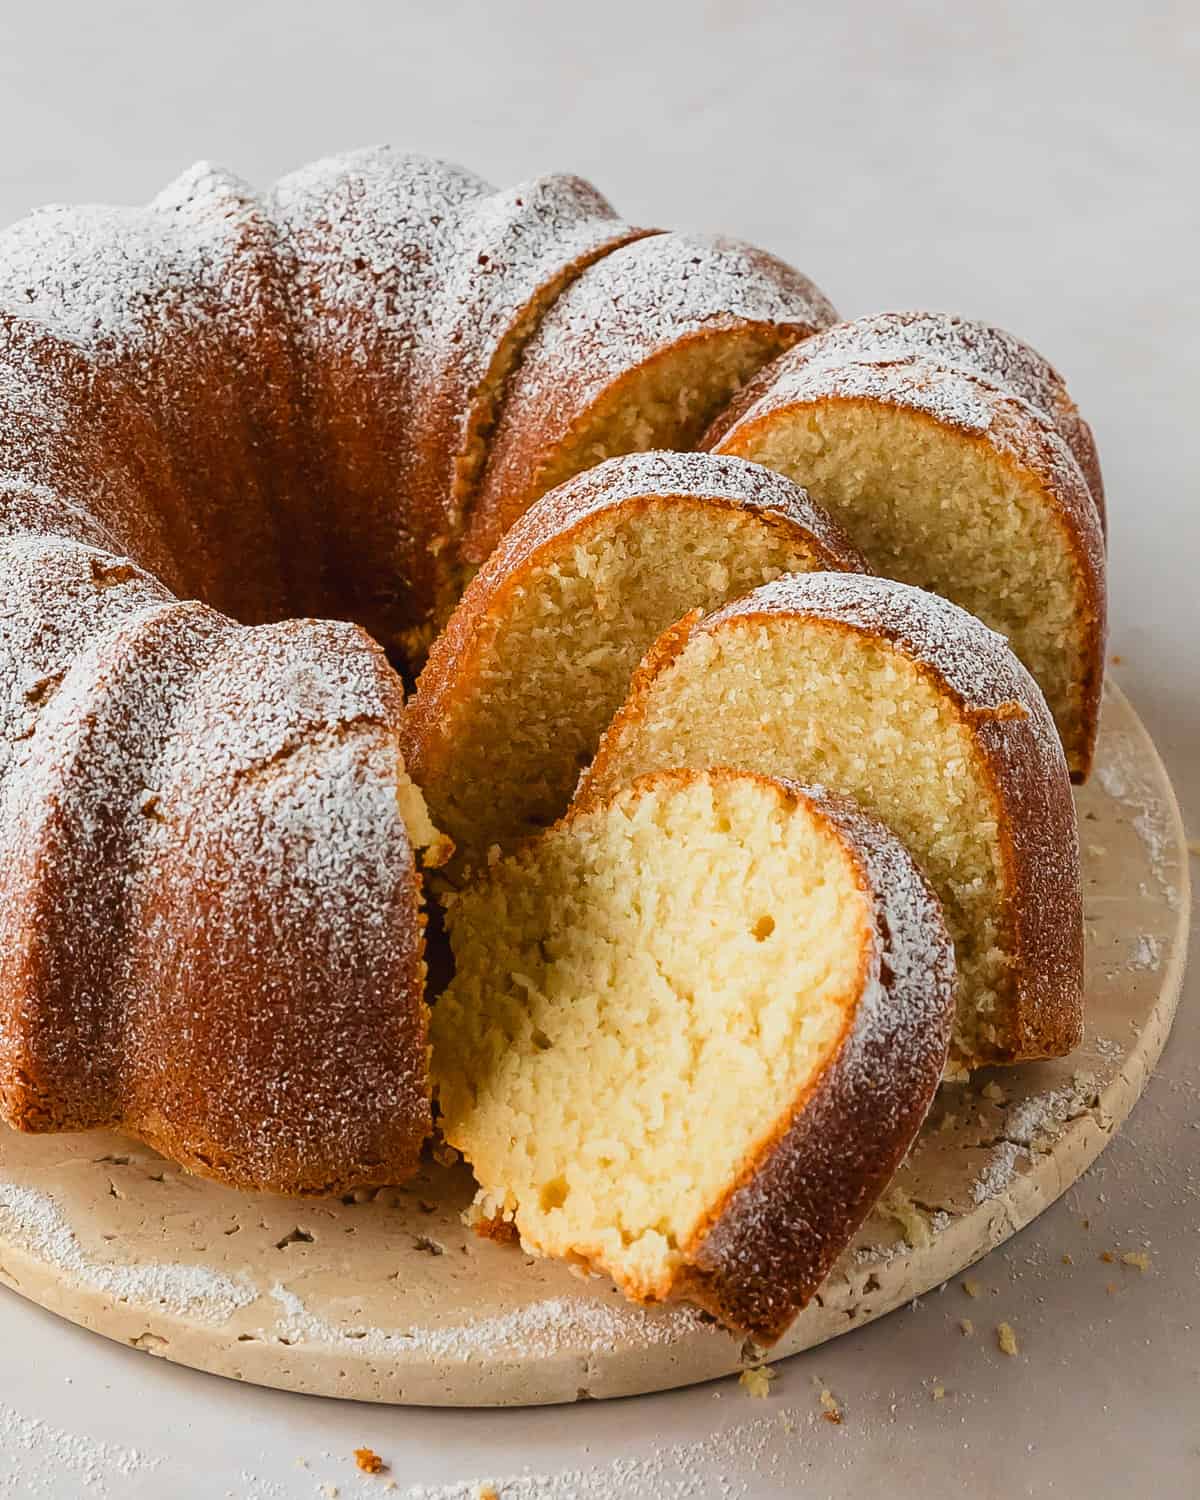 Buttermilk pound cake is an old fashioned, buttery vanilla pound cake with a moist and tender crumb. Top with this simple buttermilk bundt cake with a light dusting of powdered sugar and fresh fruit. It’s the perfect easy to make and flavorful dessert everyone will love. 